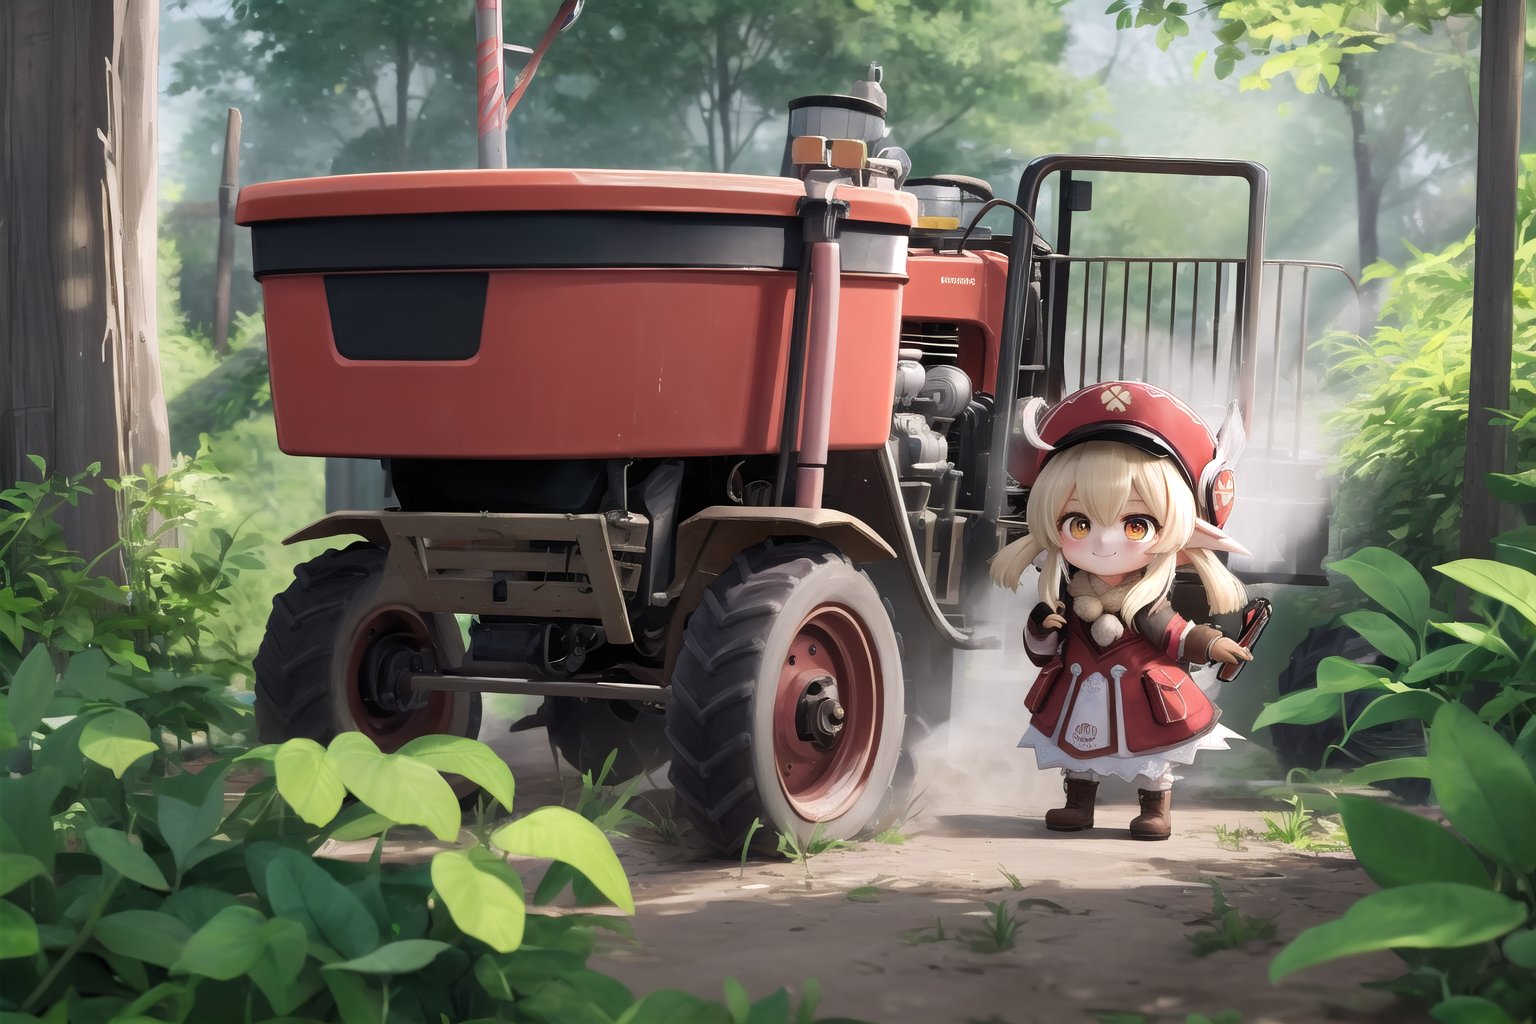 In a whimsical tableau, Klee, with a mischievous smile, takes the controls of an ultra-fast high-tech tractor amidst the lush foliage of Teyvat, its path marked by a trail of destruction. The low angle of the camera emphasizes the tractor's robust construction and Klee's petite stature. Soft, golden light illuminates the juxtaposition between the industrial behemoth and Klee's disheveled exterior, which brings out her scrappy spirit to the fullest.